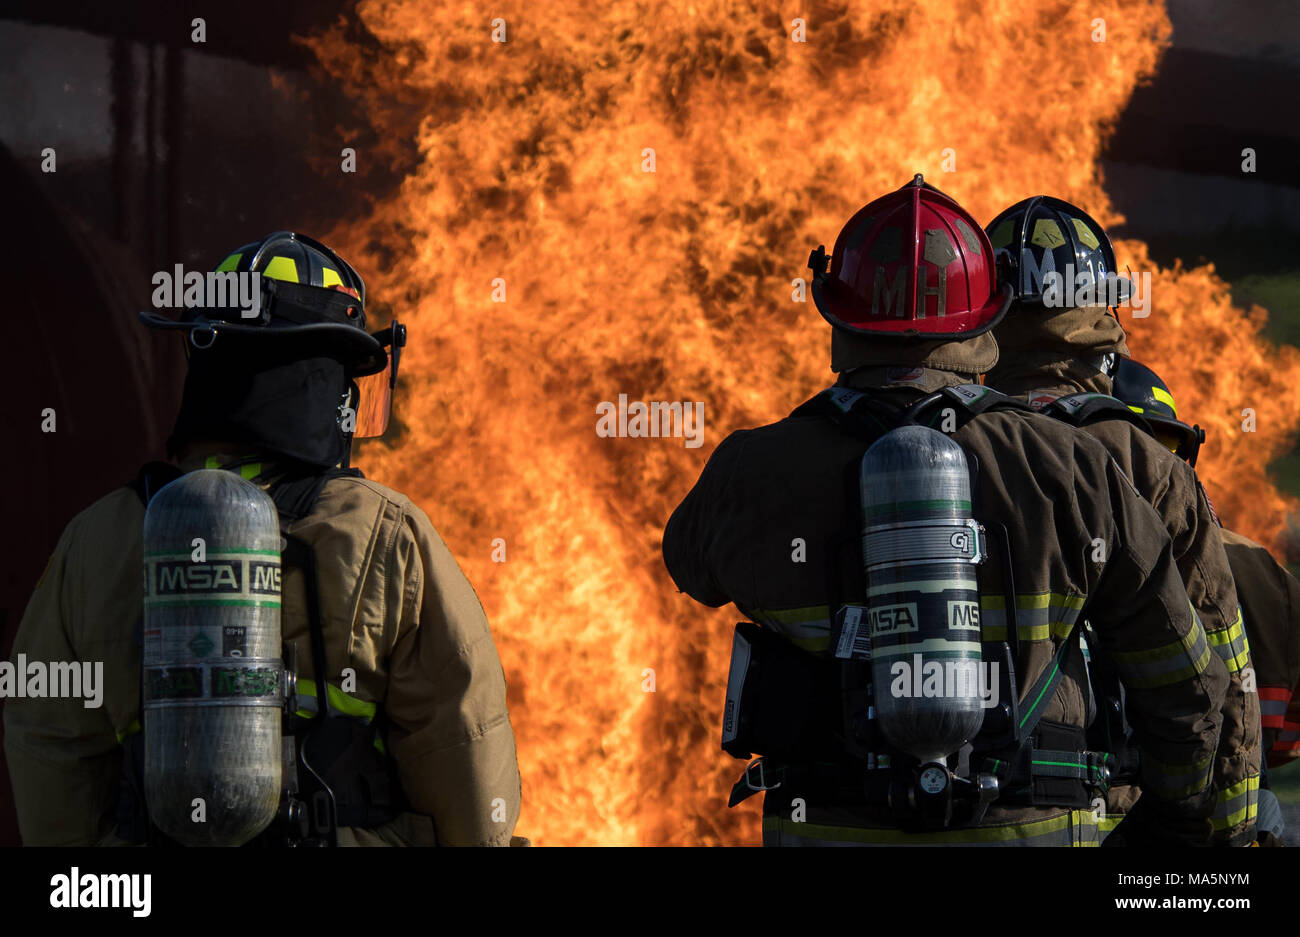 A firefighter assigned to the 2nd Civil Engineering Squadron, Captain Marcus Houston and Engineer DeMarcus Murray, Shreveport Fire Department firefighters, prepare to extinguish a fire during an annual recertification burn at Barksdale Air Force Base, La., March 20, 2018. Barksdale hosted the SFD for their annual re-certification exercise, which simultaneously fulfilled an annual requirement for themselves. (U.S. Air Force photo by Airman 1st Class Tessa B. Corrick) Stock Photo